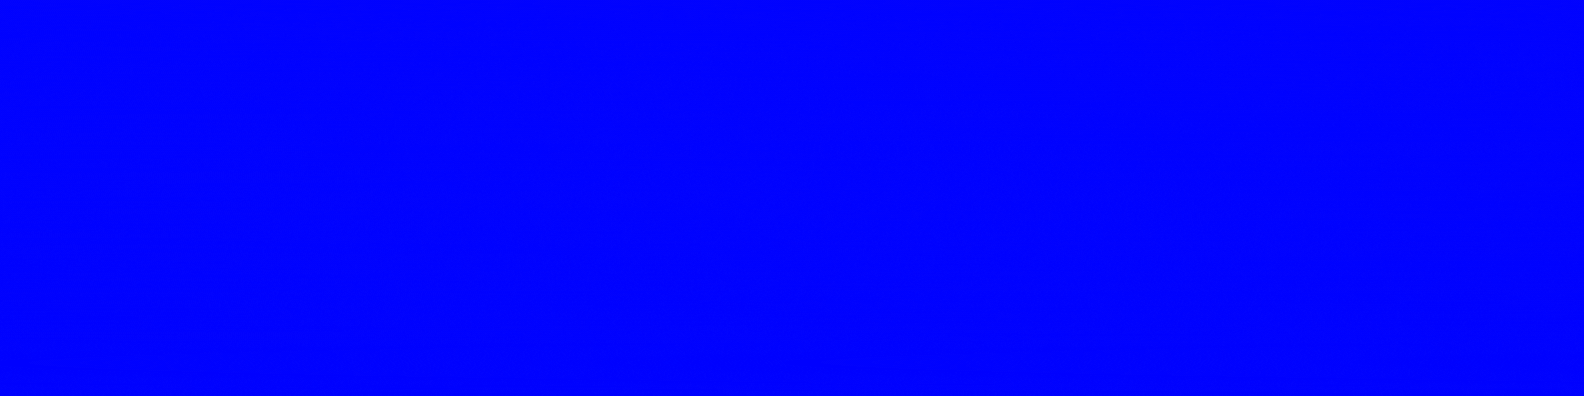 blue_and_white_abstract_technology_linkedin_banner.gif